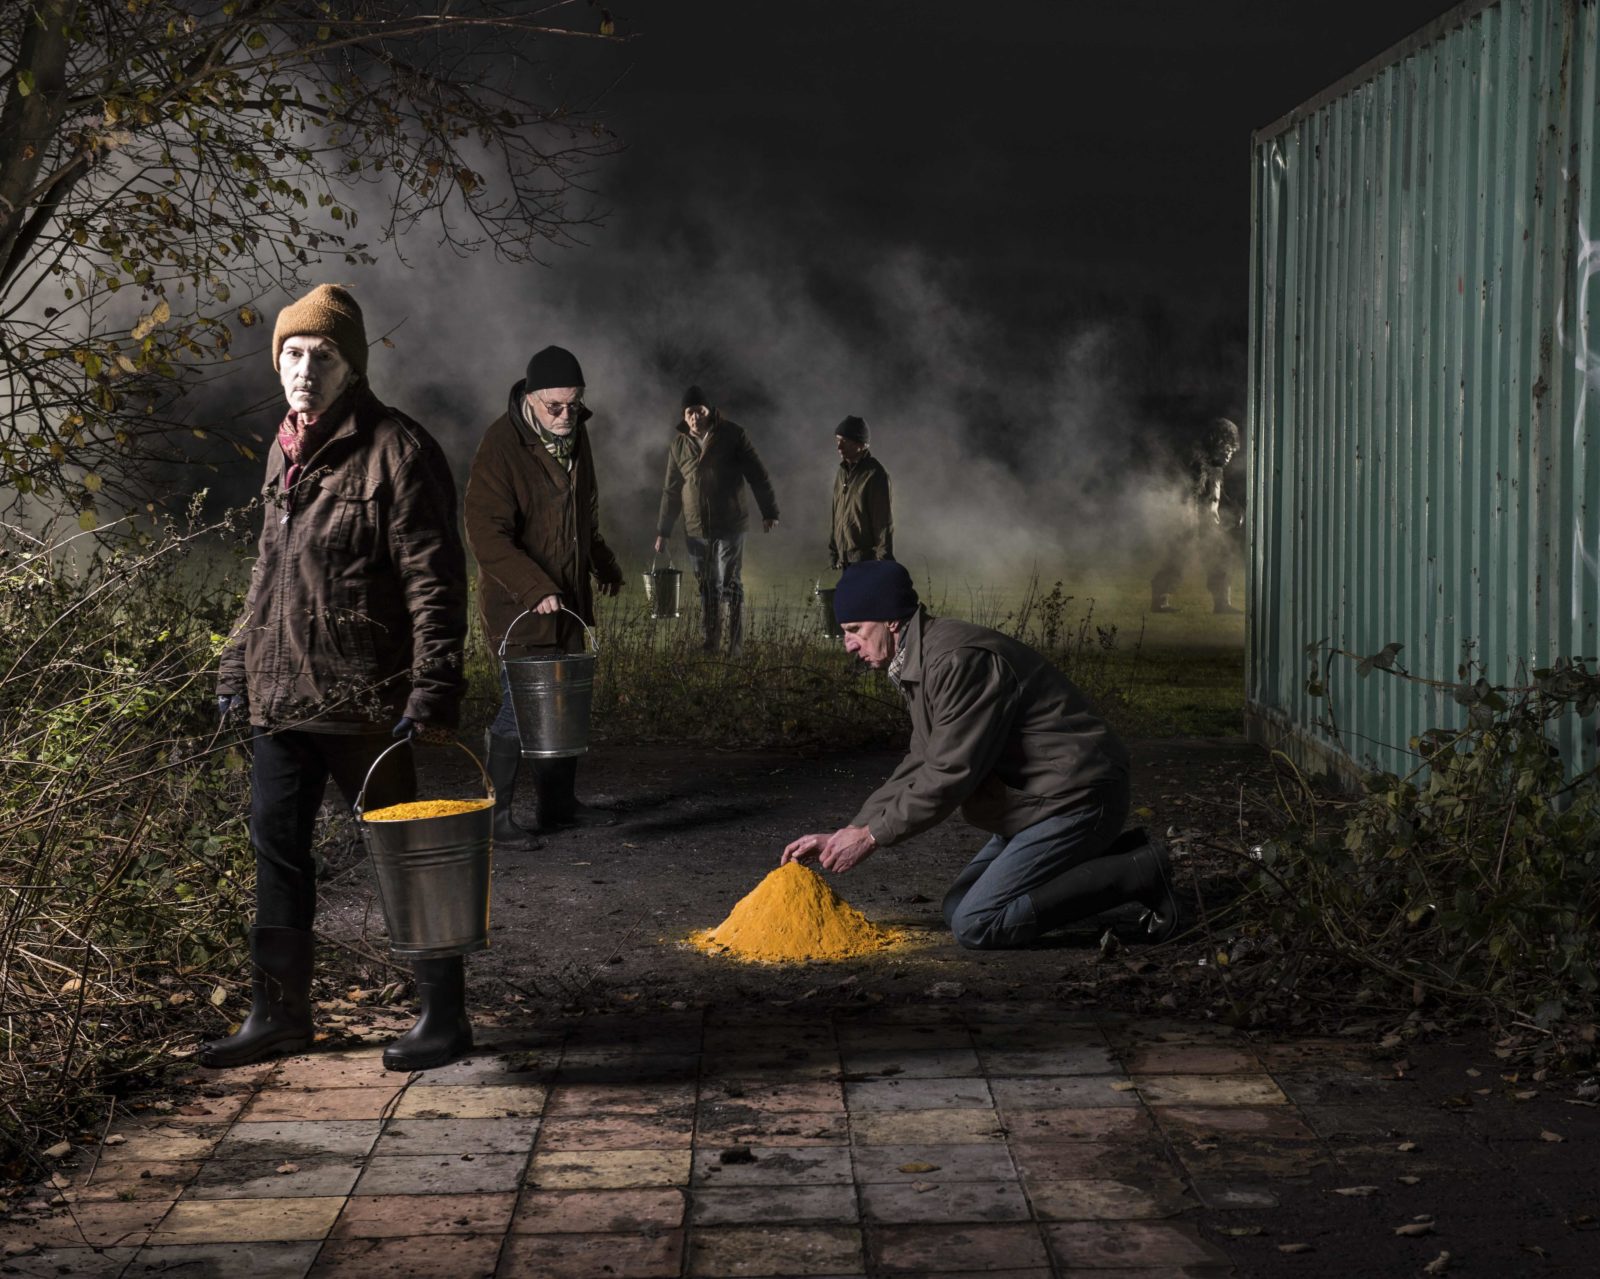 Five men dressed in winter coats and hats stand and kneel on patio slabs and a field. One tends to a pile of mustard coloured powder, the others carry metal buckets full of mustard coloured tablets, there is a gorilla and smoke in the background.